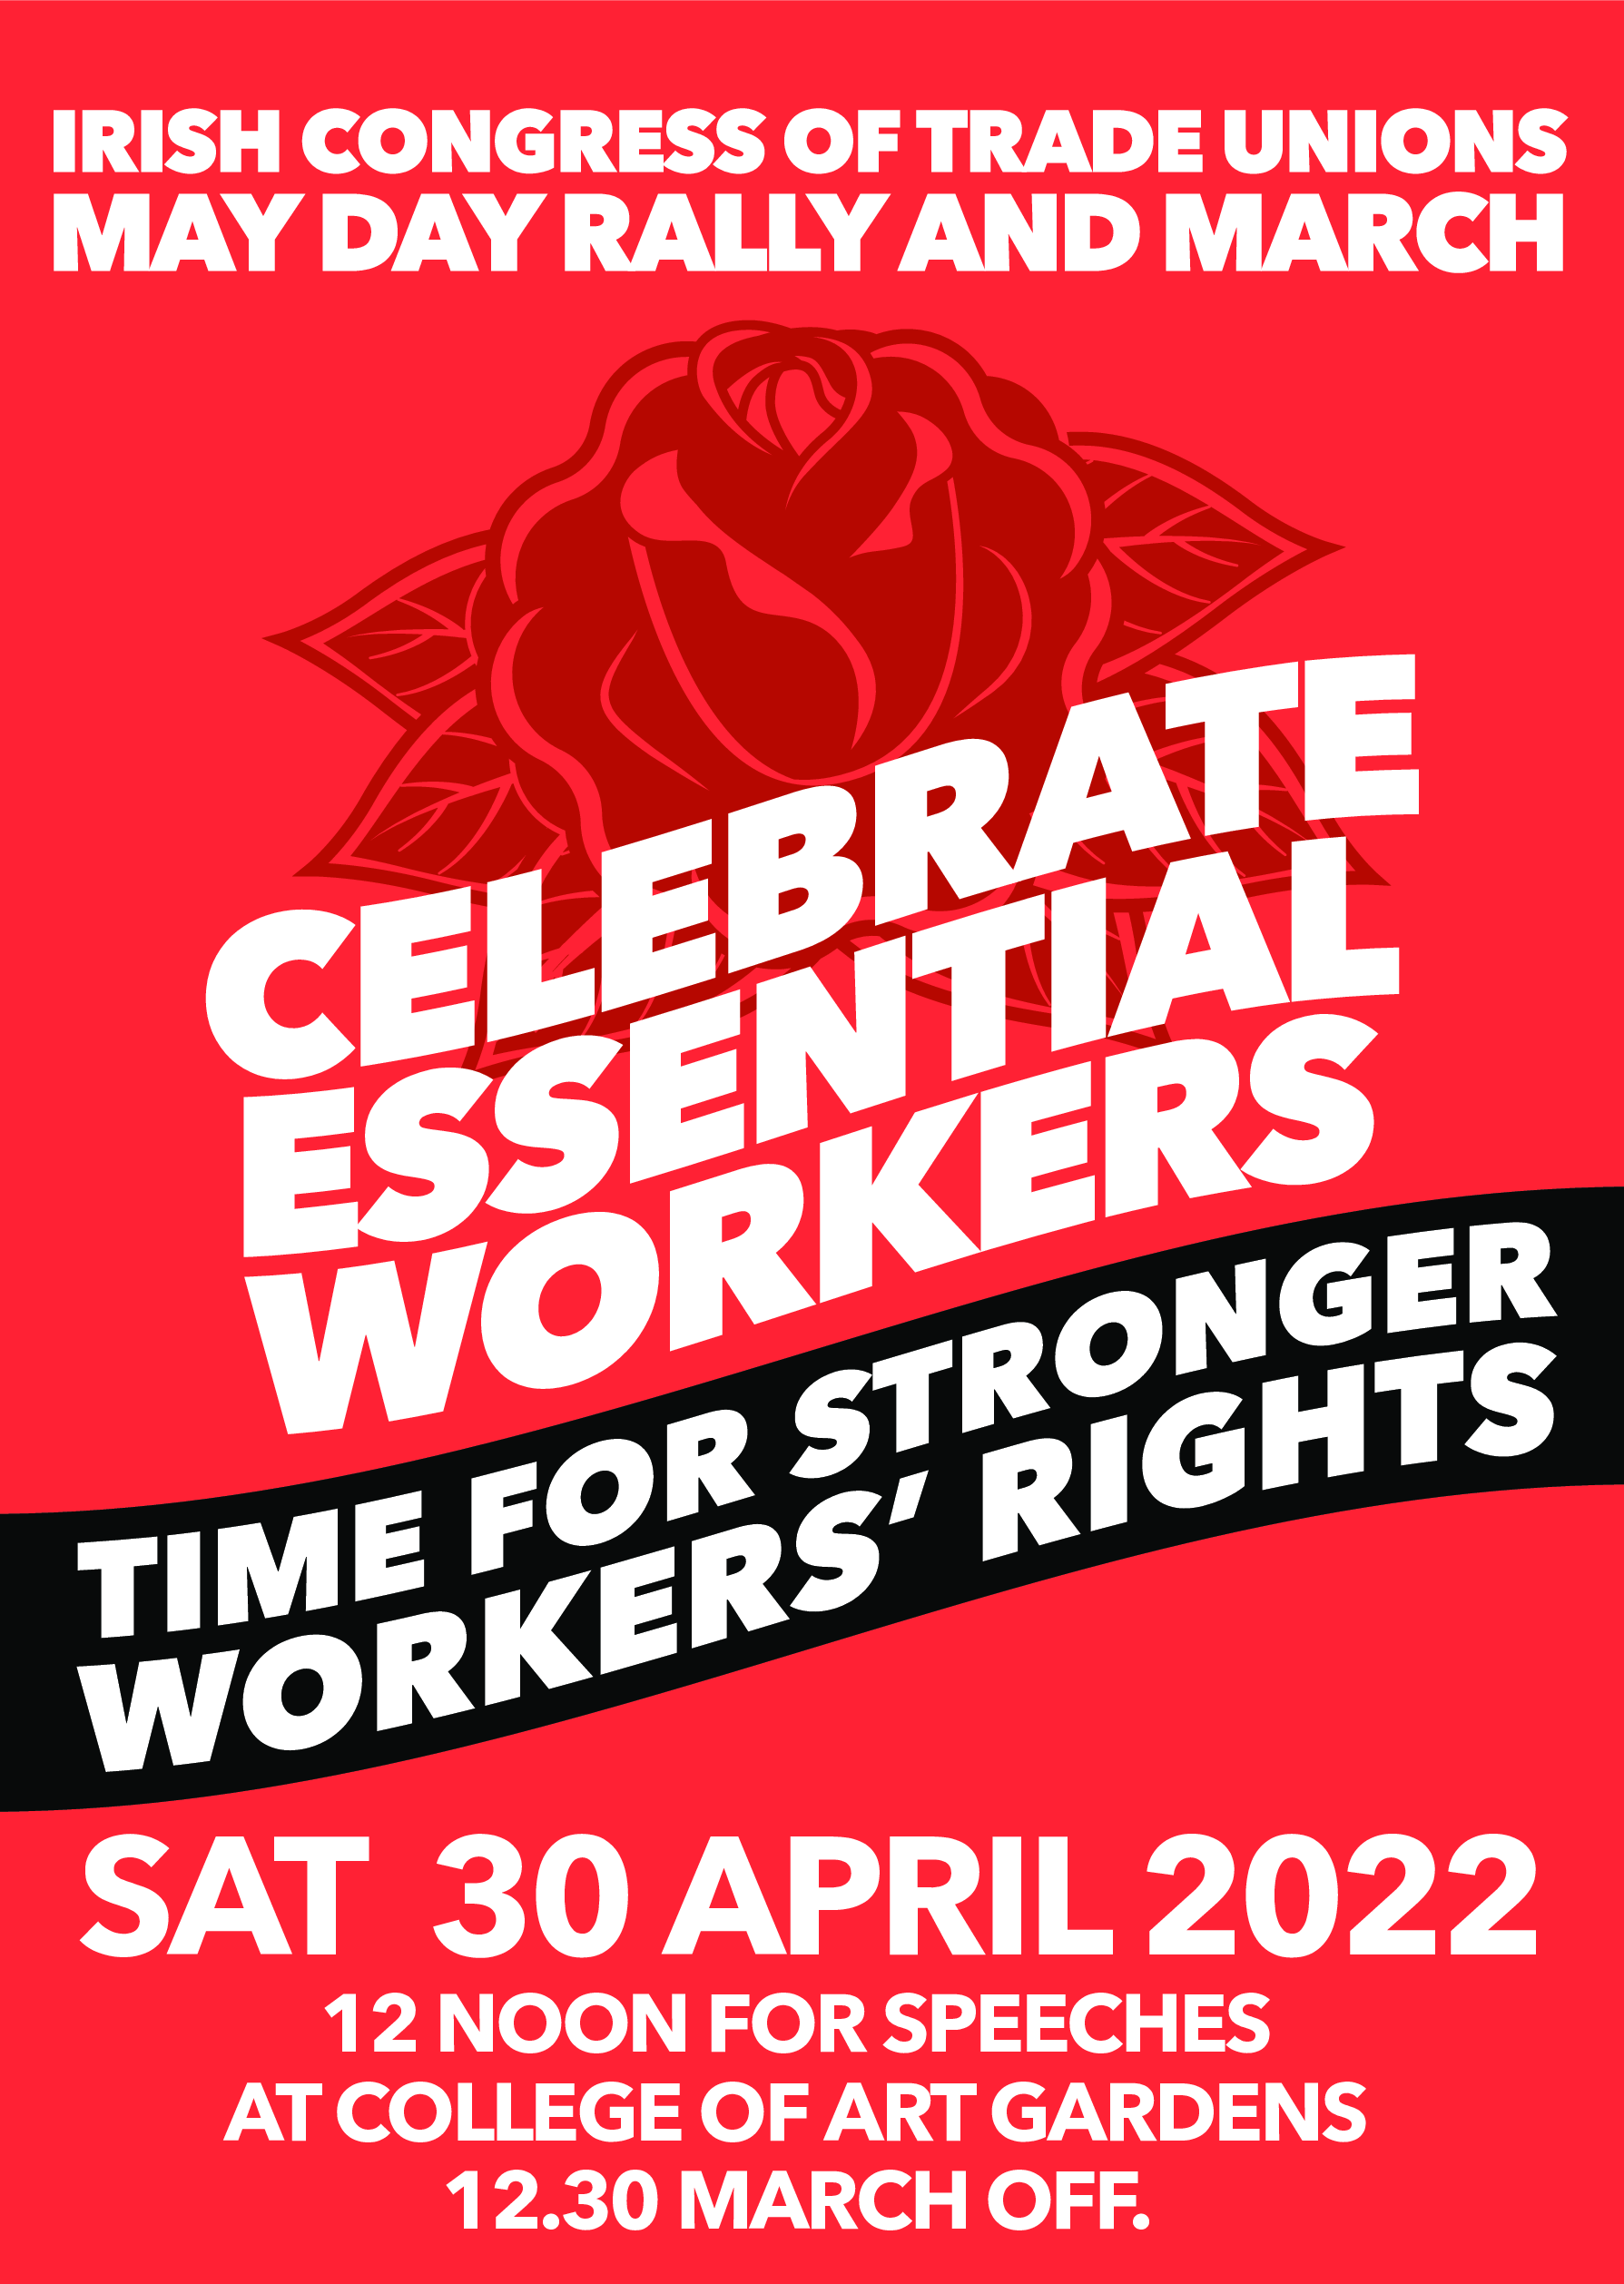 May Day march - 30 April 2022